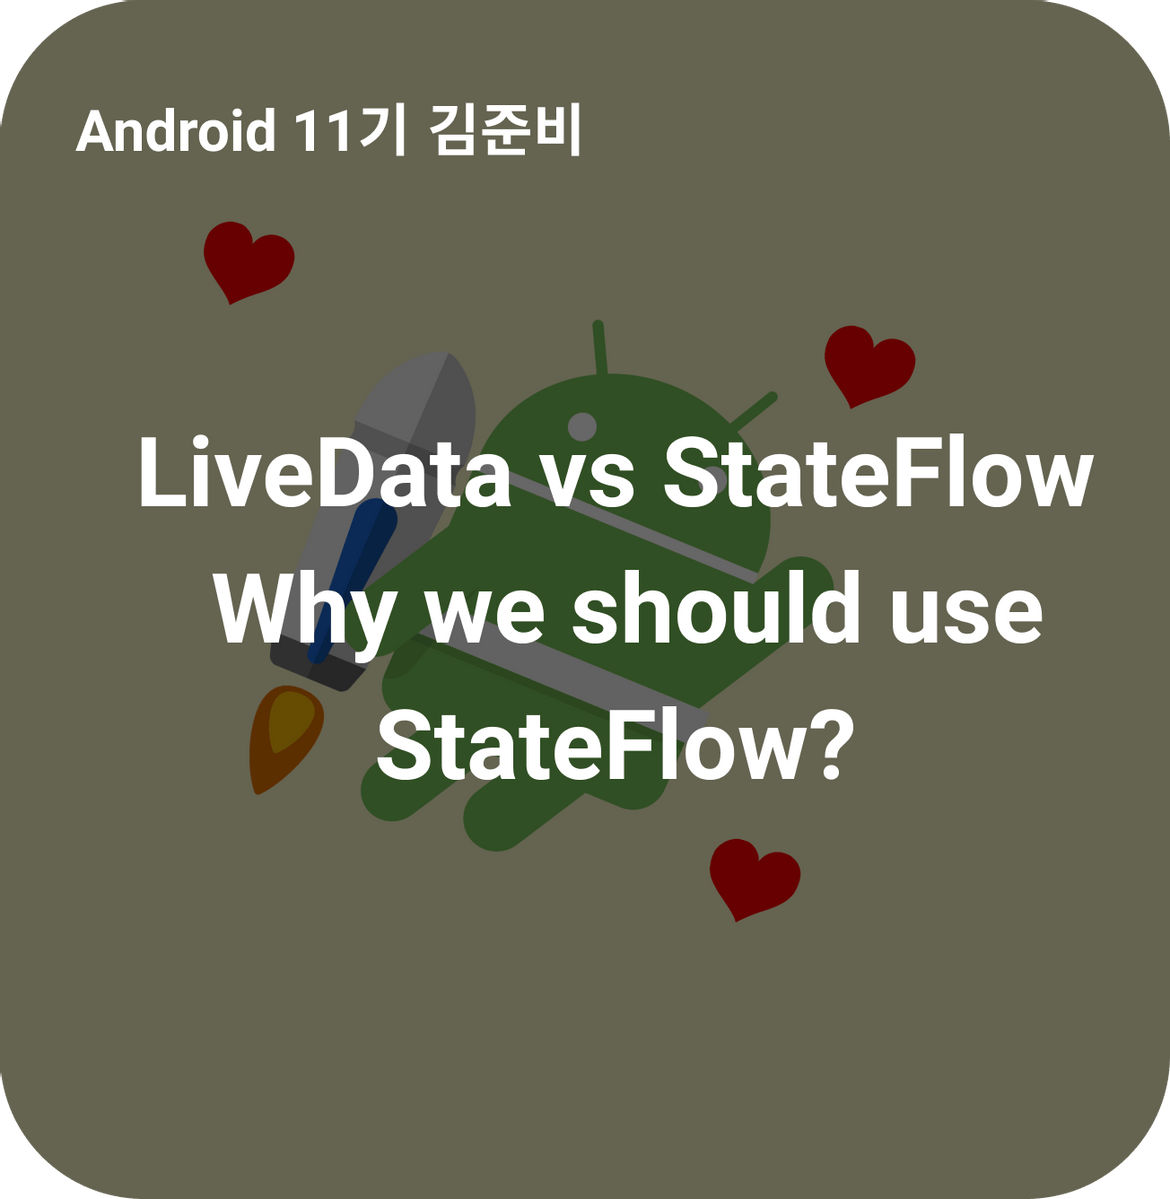 LiveData vs StateFlow, Why we should use the 'StateFlow'?